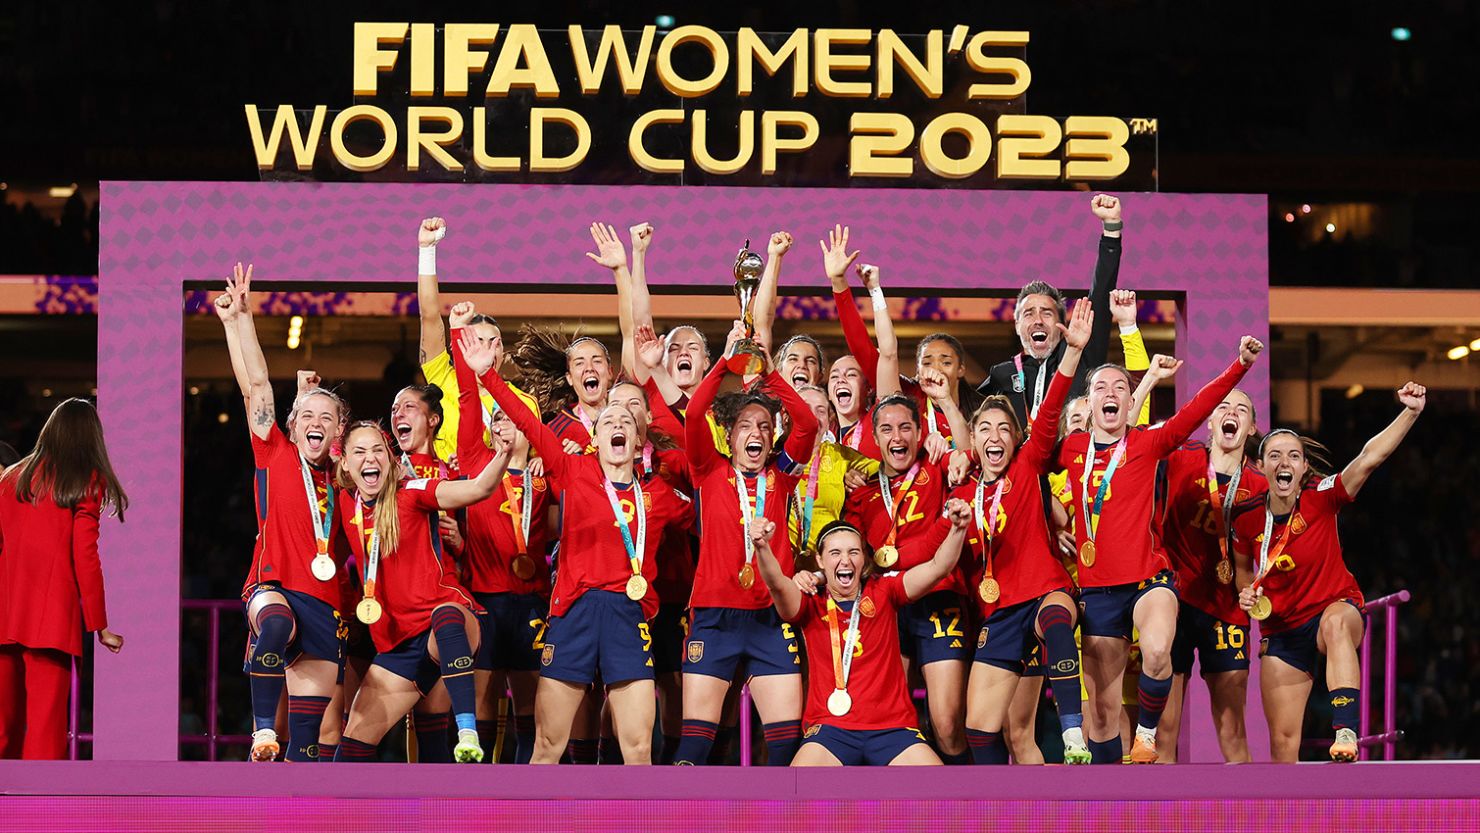 Elite women's sports tipped to generate over $1.2 billion next year